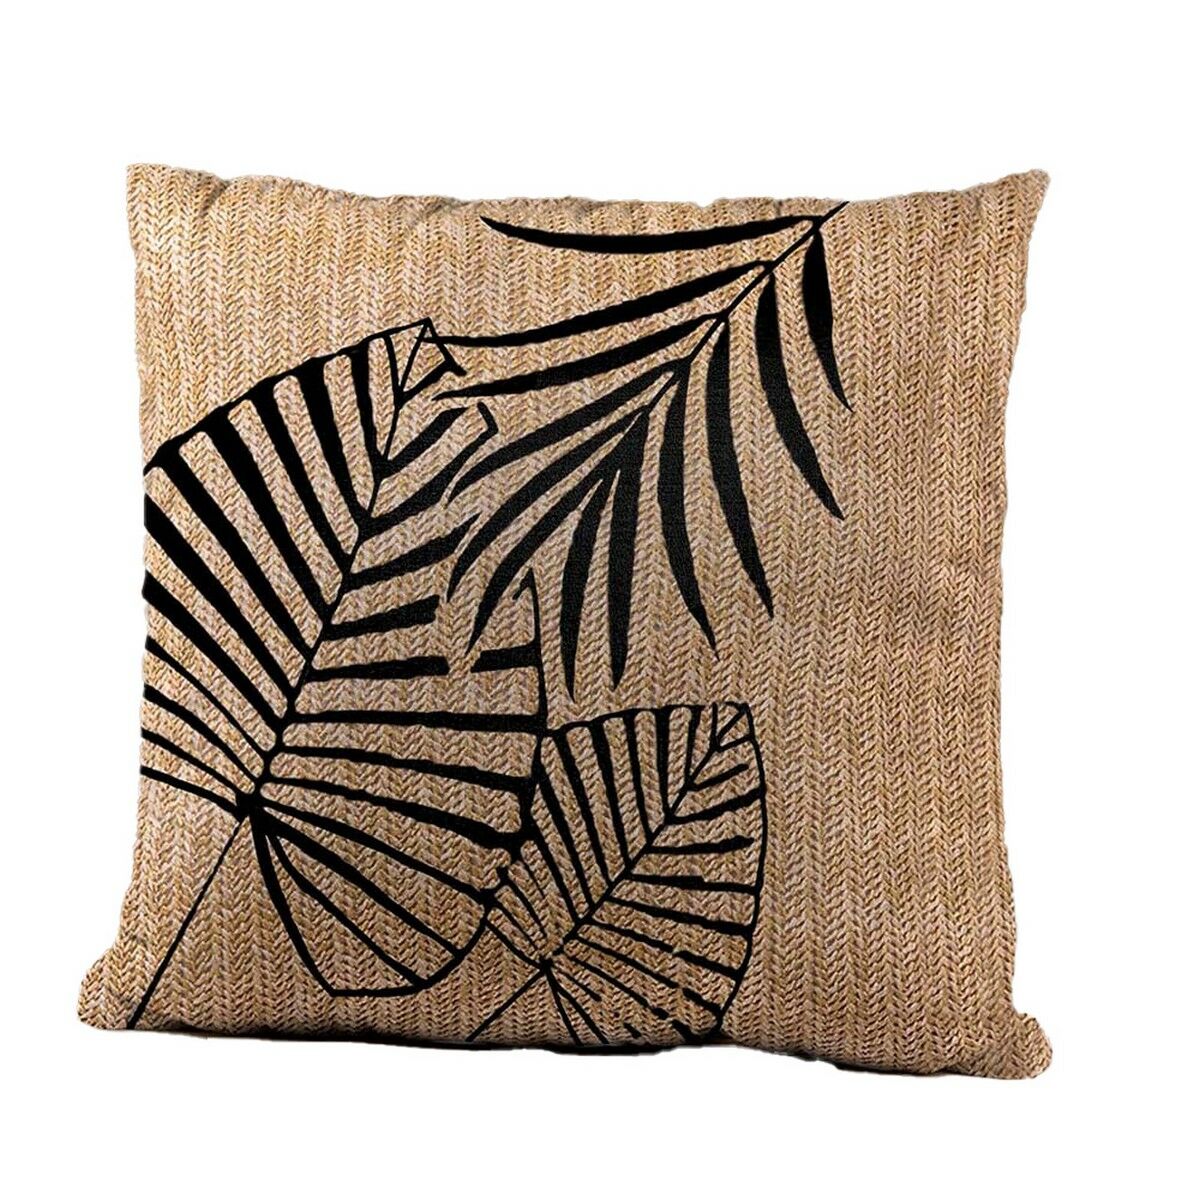 Craft Cushion with Black Leaves (43 x 43 cm)